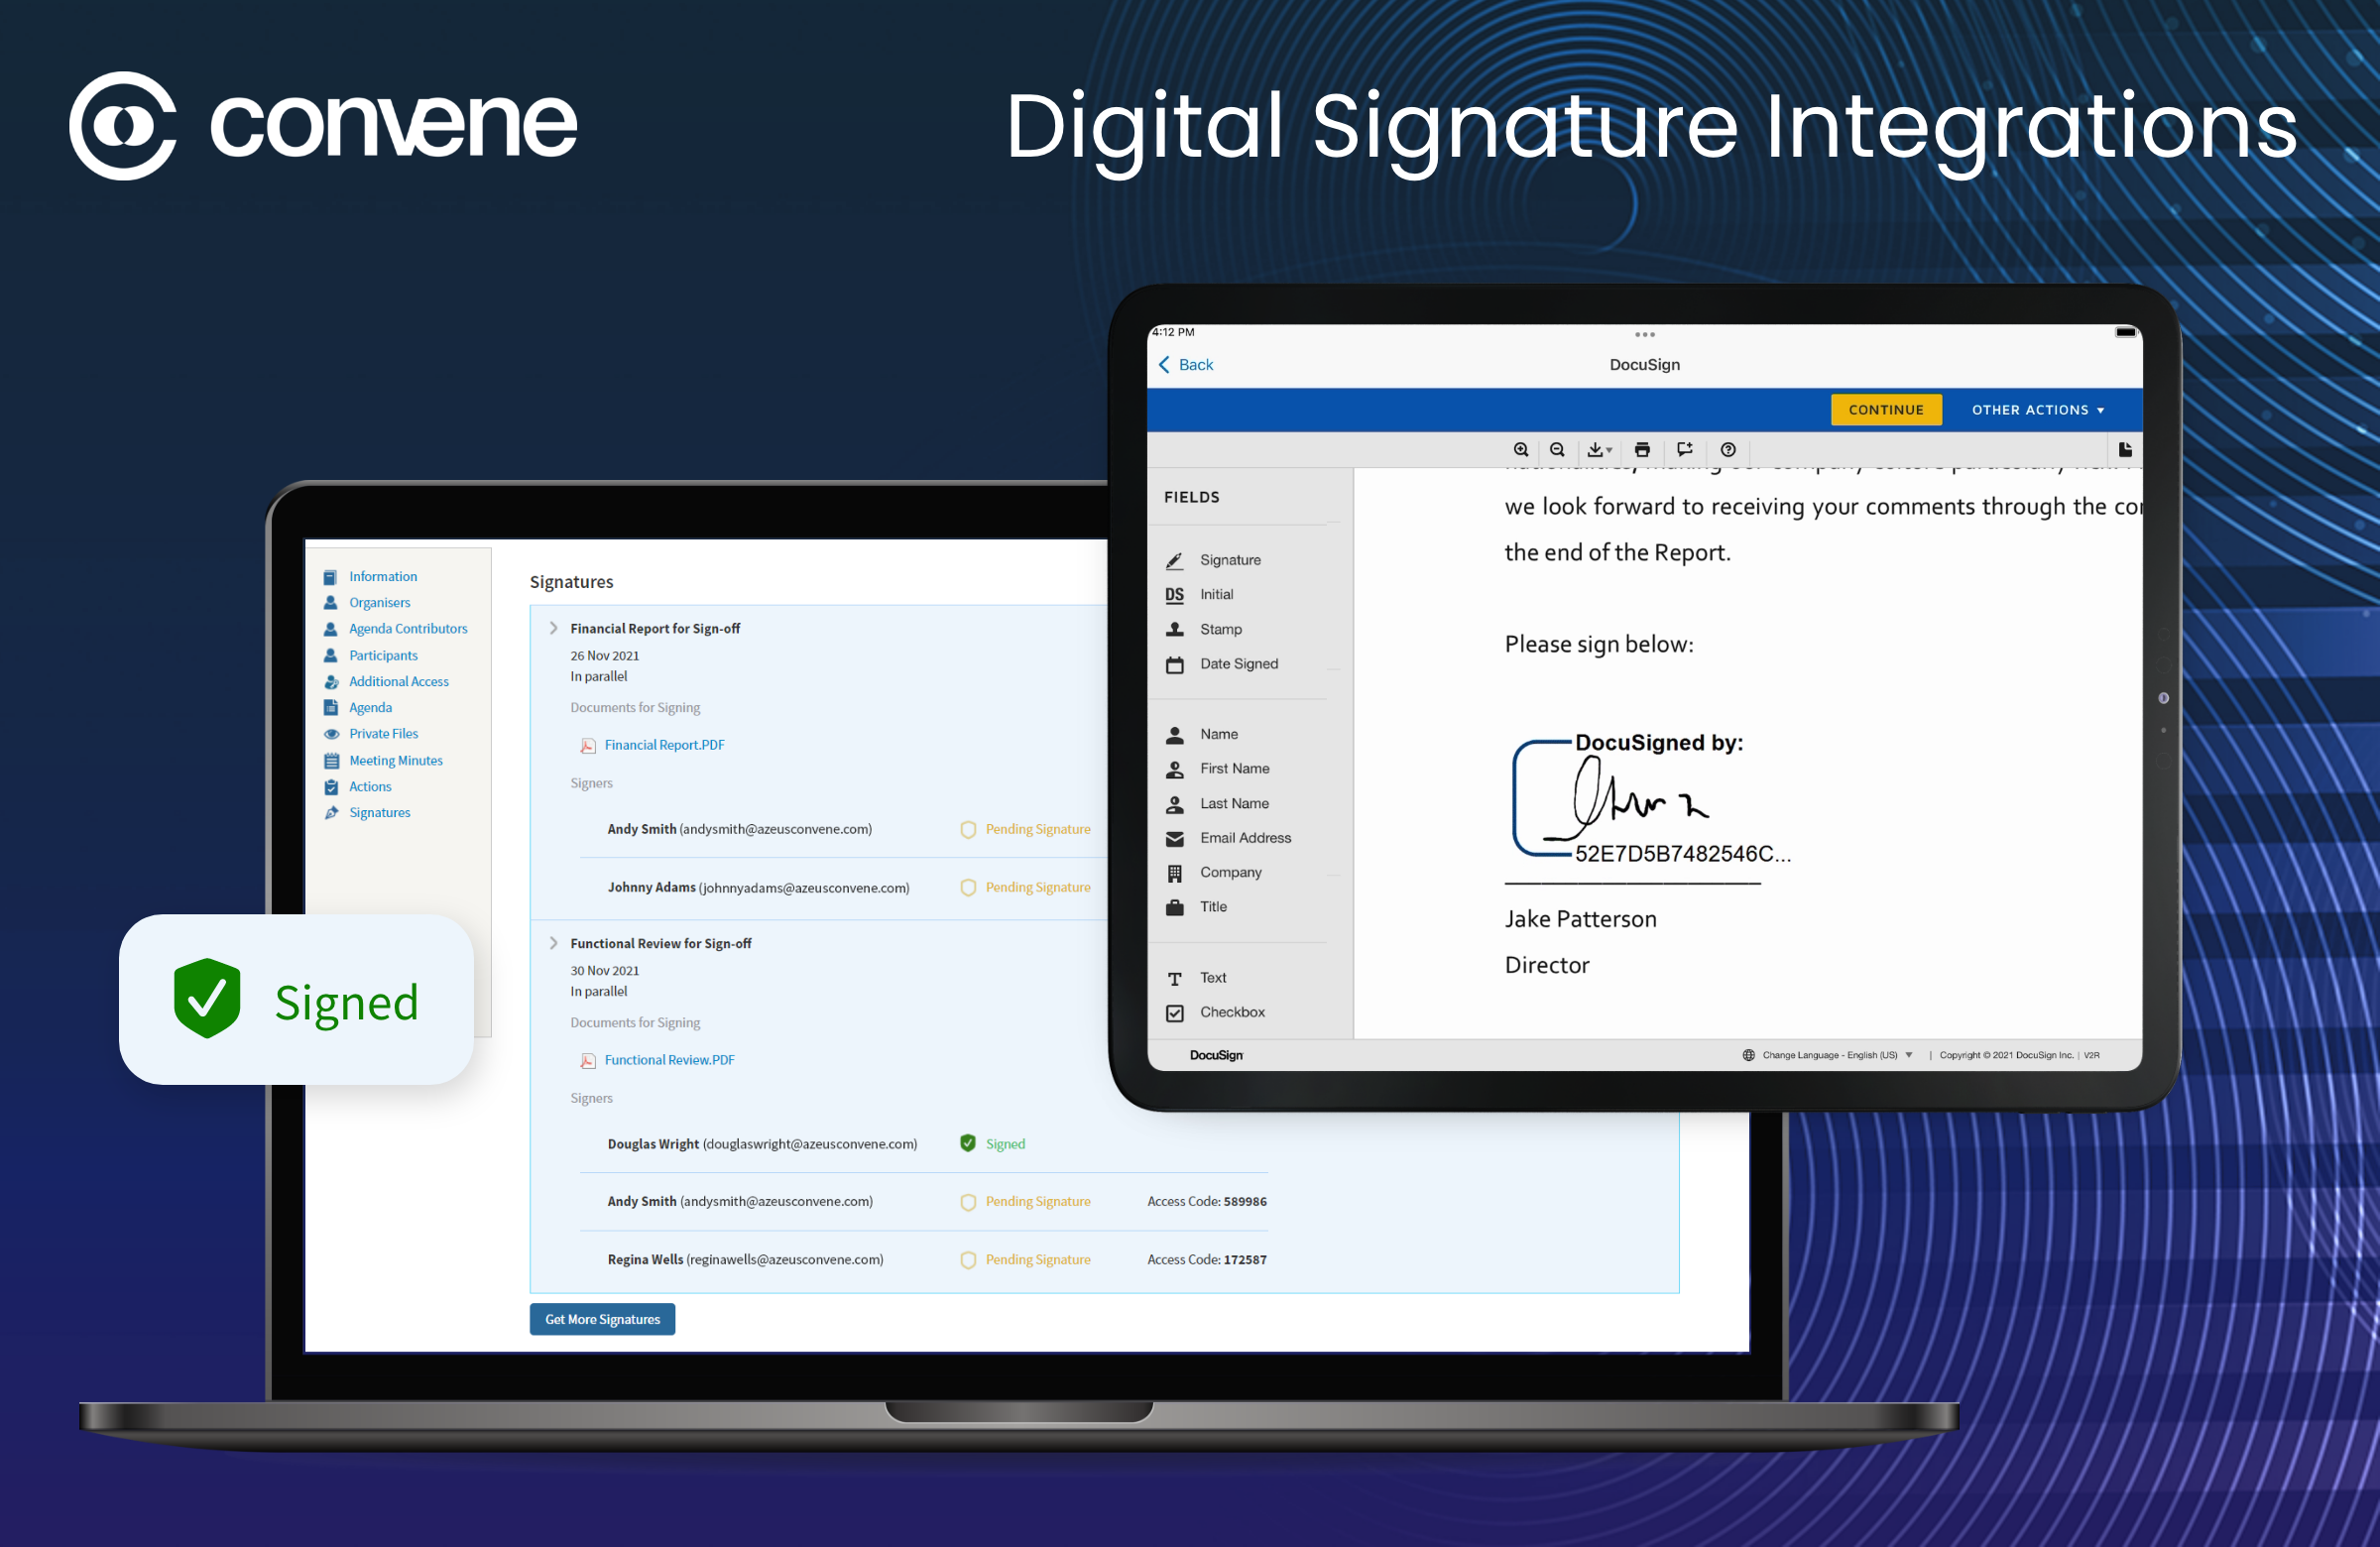 Experience a seamless end-to-end signing workflow within Convene through integrations with digital signature providers like DocuSign, enabling you to encrypt and digitally sign crucial documents effortlessly.